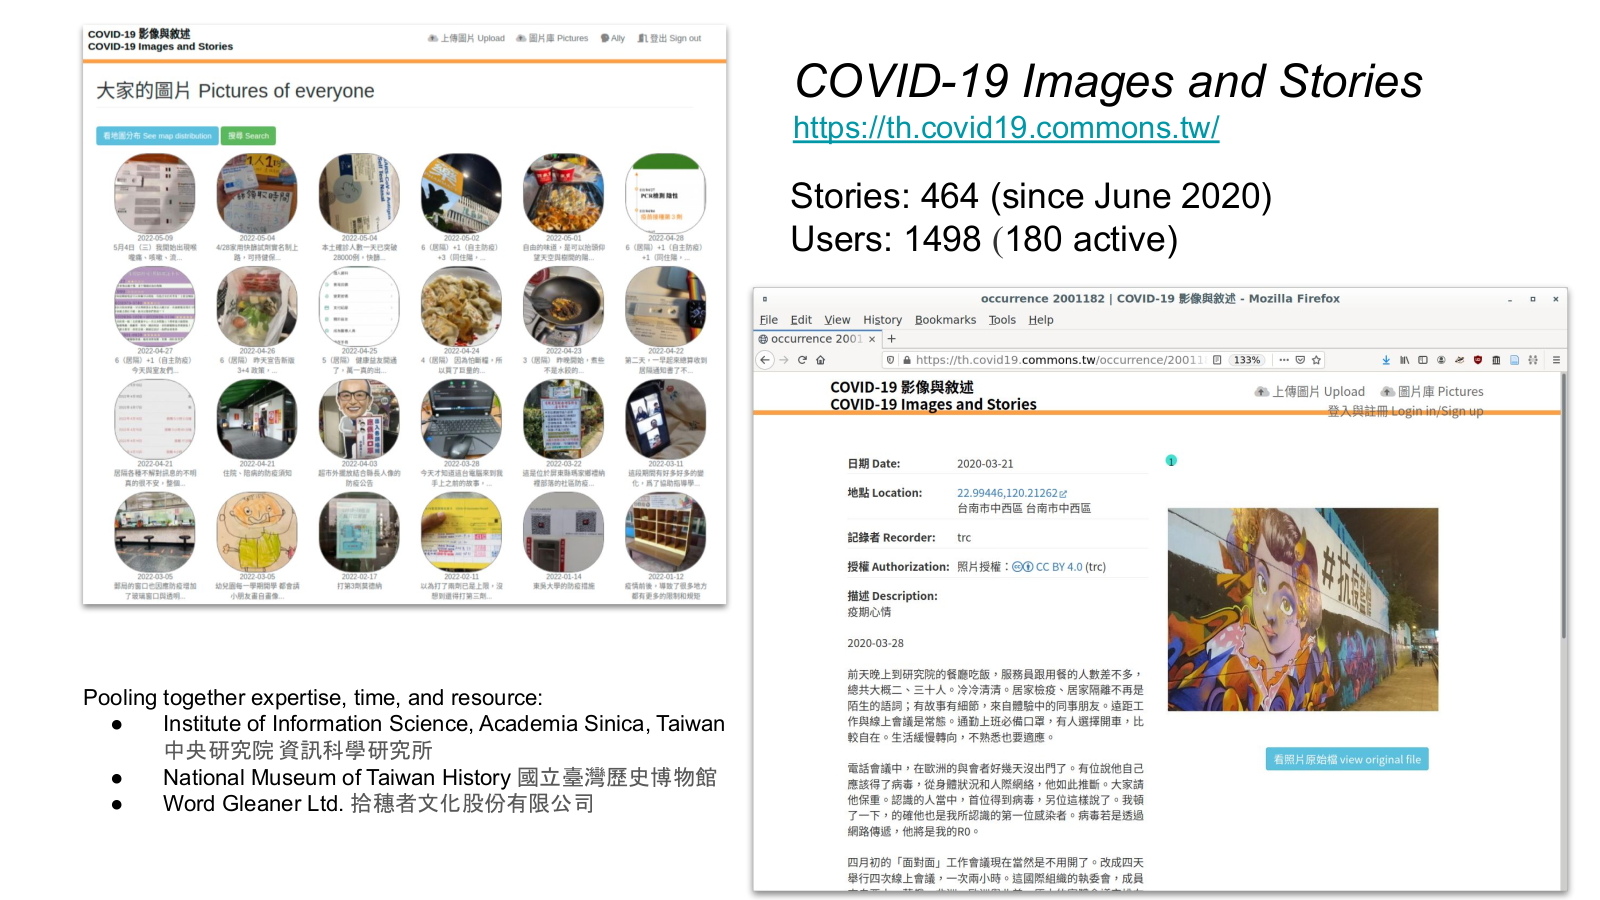 Slide from Web Archiving Conference showing photos submitted by Taiwanese contributors about their life during the COVID pandemic.